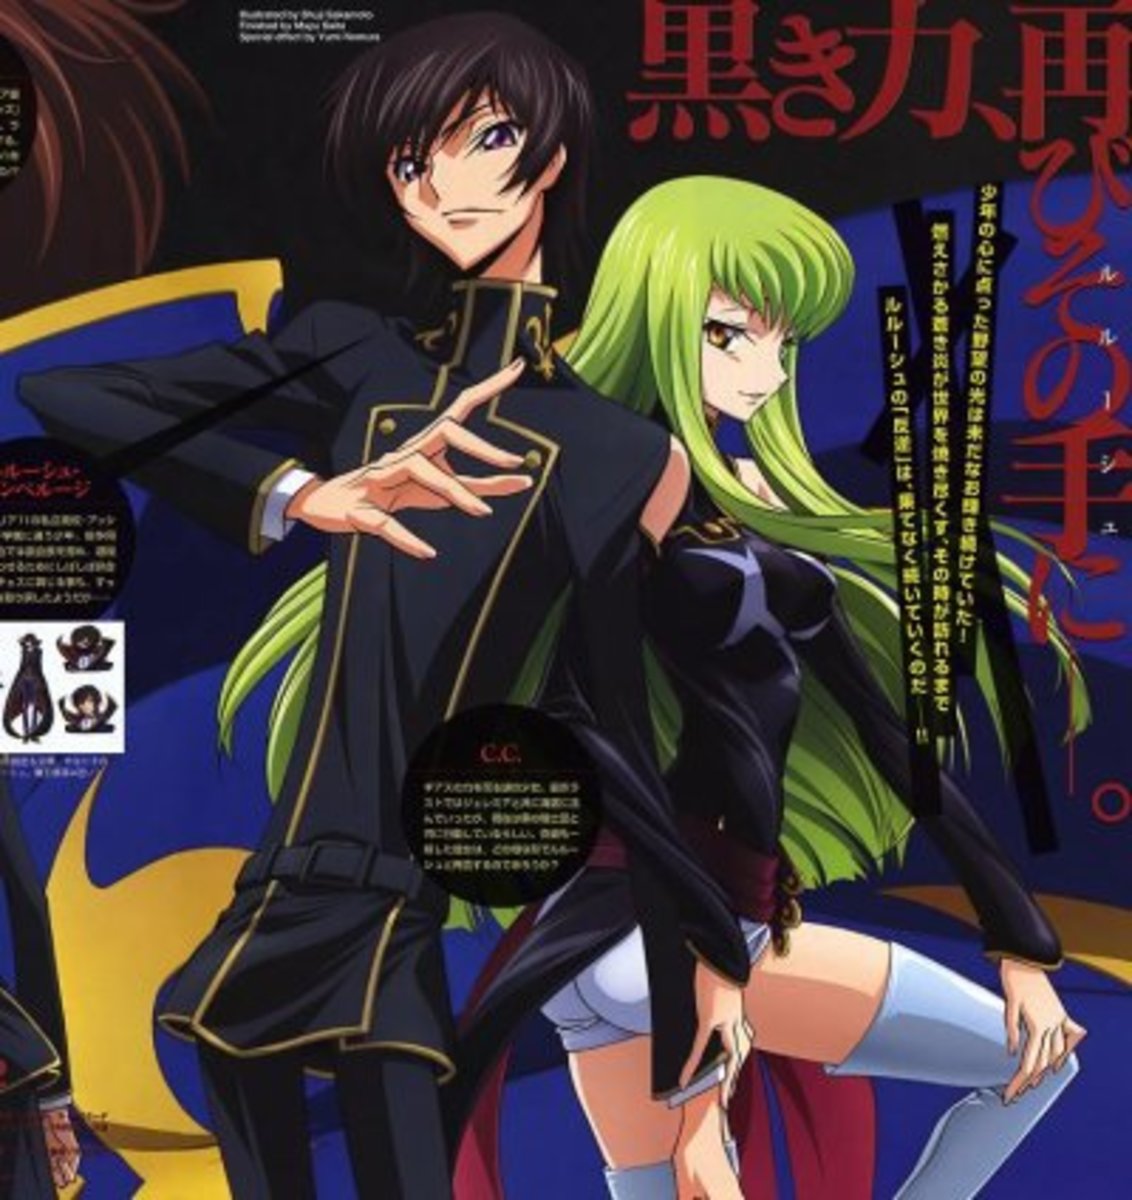 Code Geass Anime Opening & Ending Theme Songs With Lyrics - HubPages